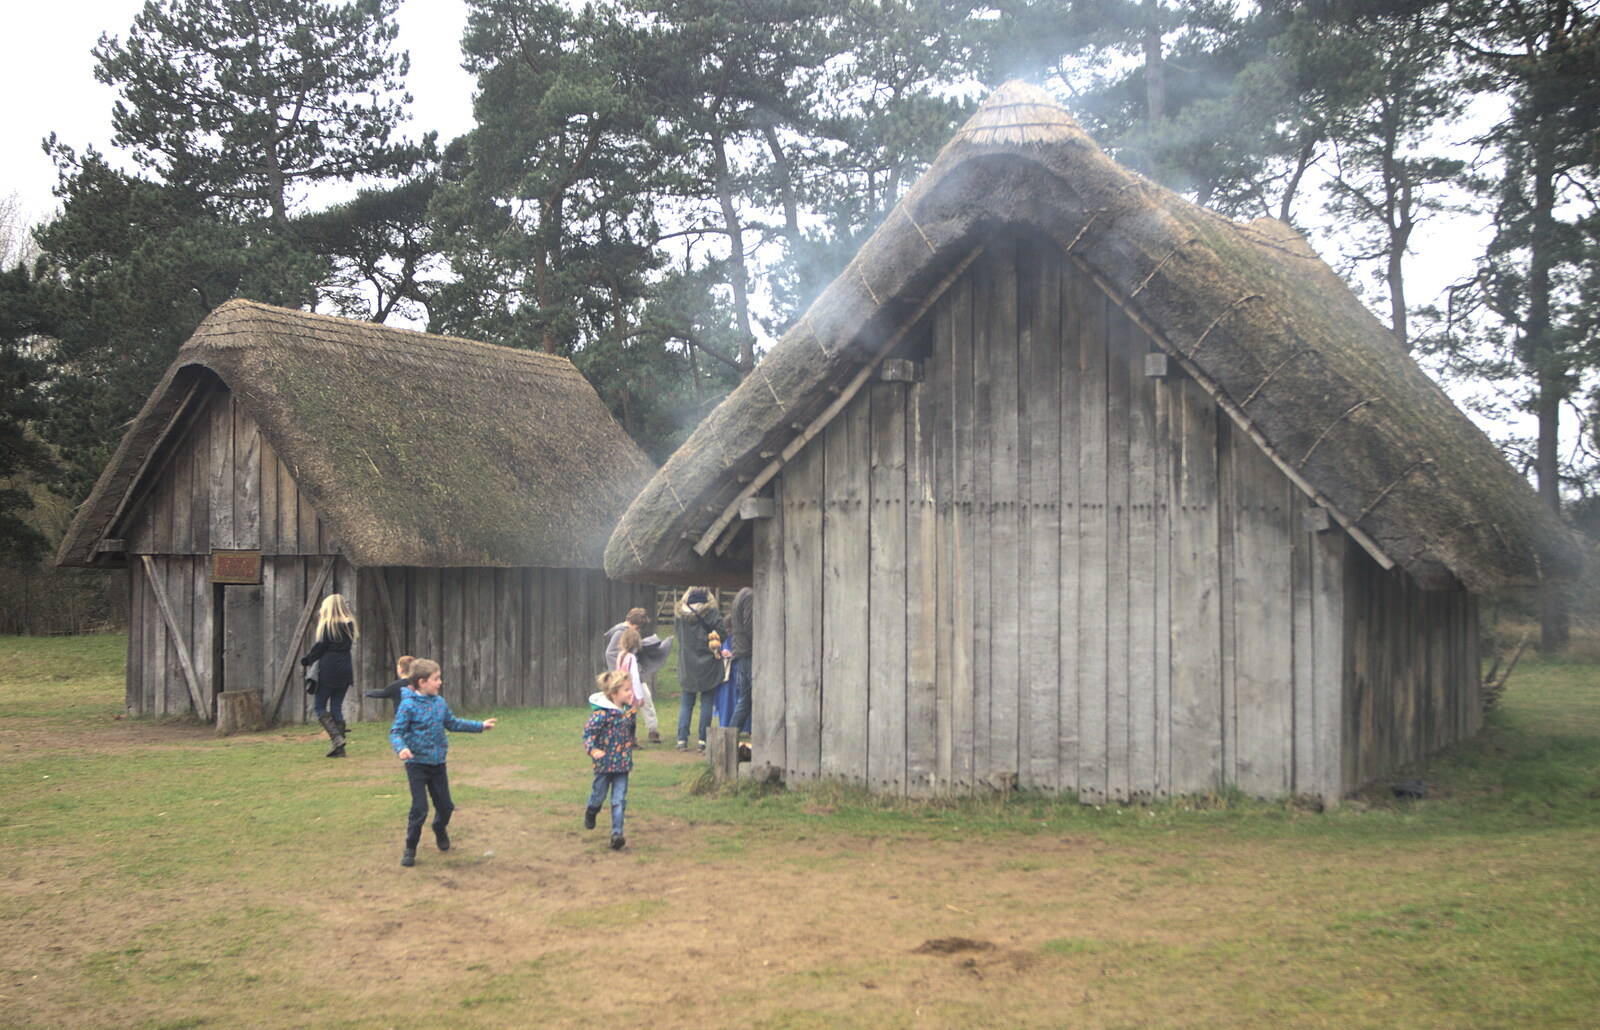 The boys run around a smoking house from An Anglo-Saxon Village, West Stow, Suffolk - 19th February 2017